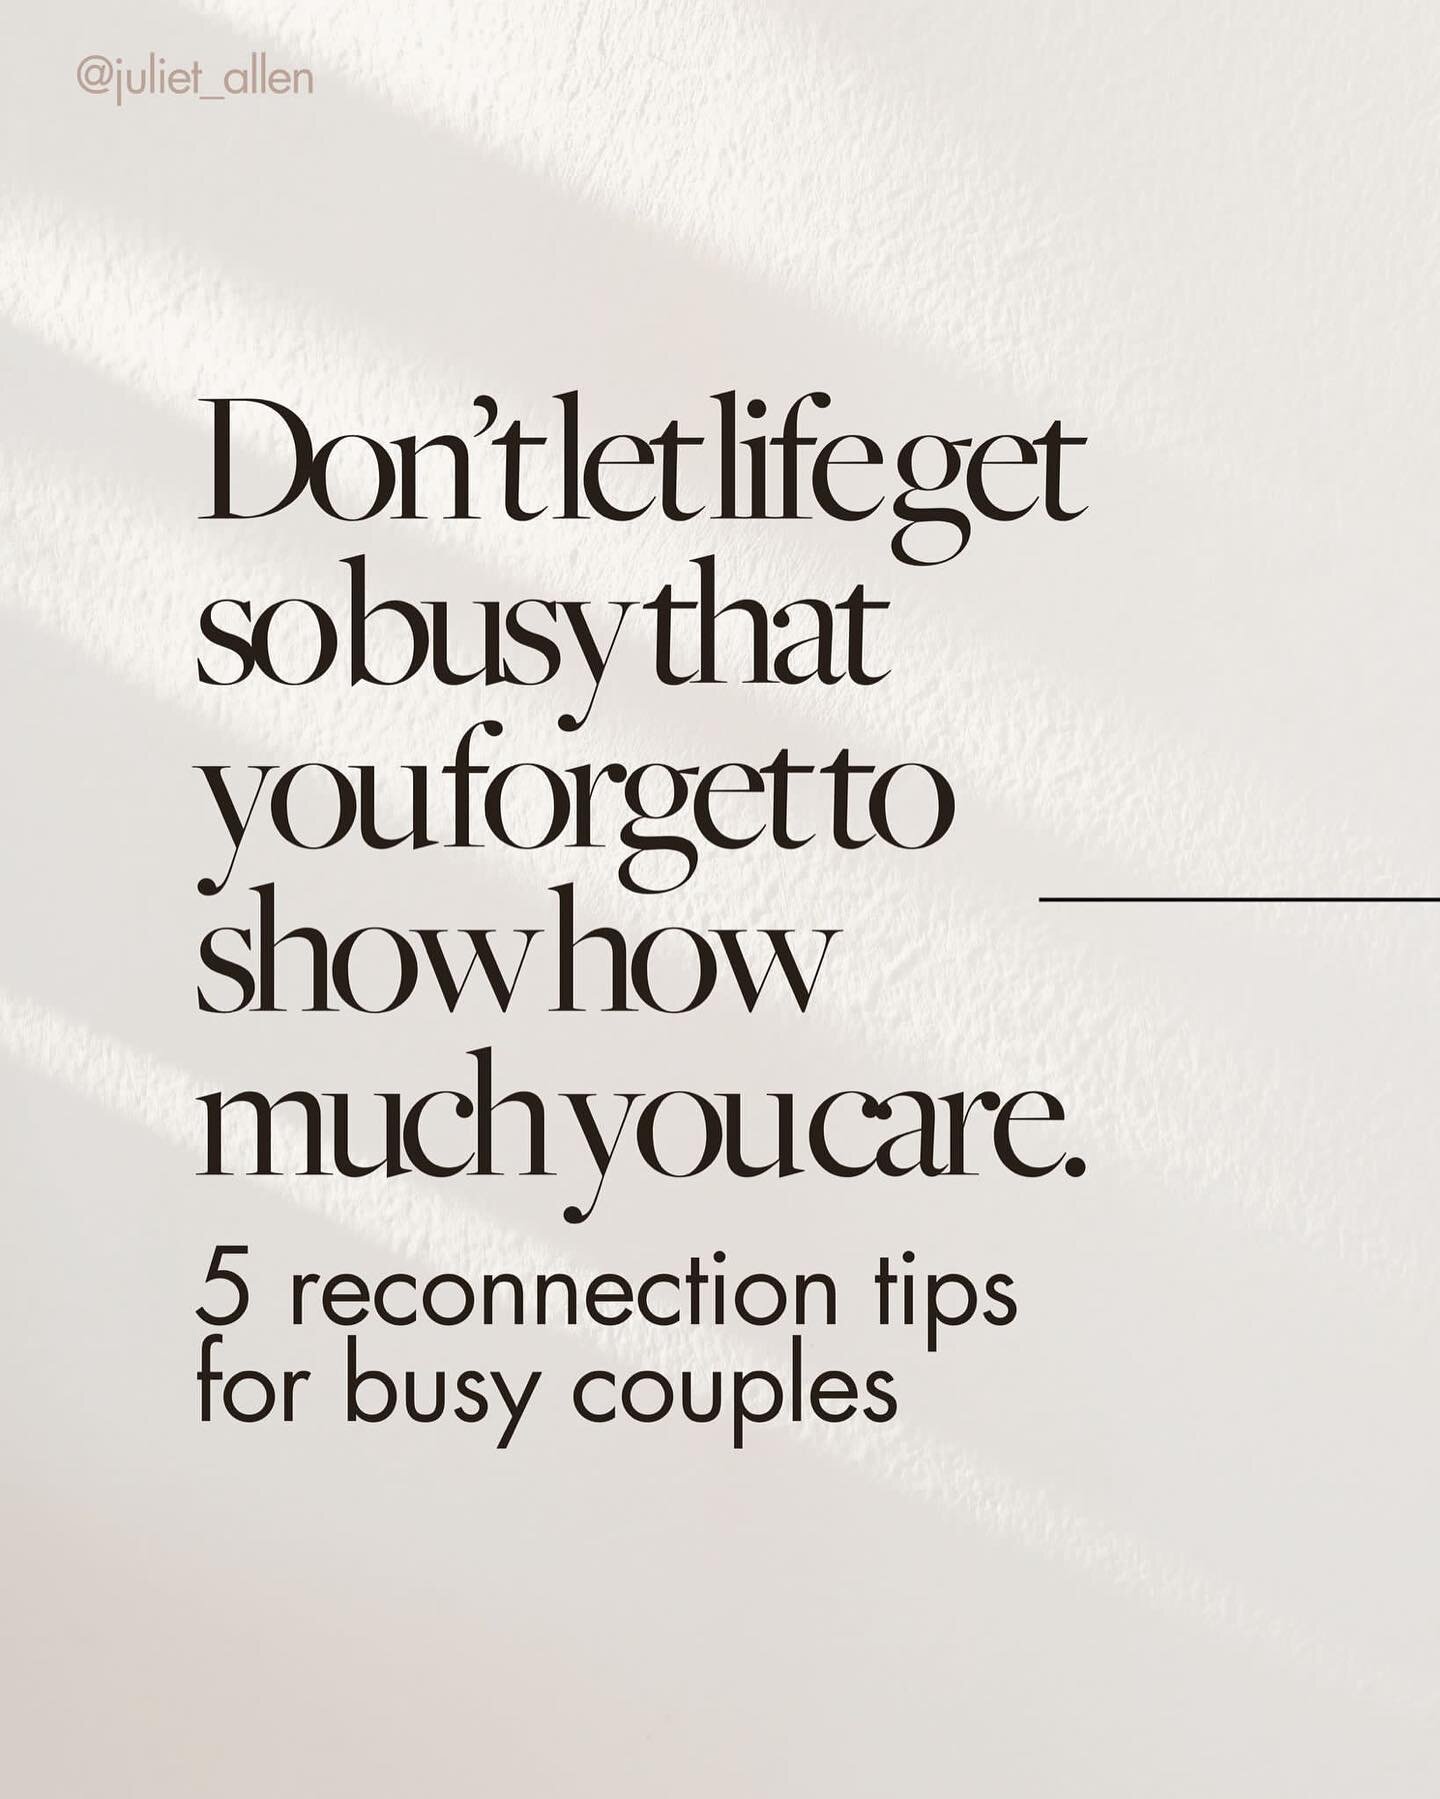 5 CONNECTION TIPS FOR BUSY COUPLES

Reality check: it&rsquo;s 2024 and most people&rsquo;s lives are getting busier &amp; busier. The majority of the population are NON STOP. The consequence of the busy culture is less connection and intimacy for cou